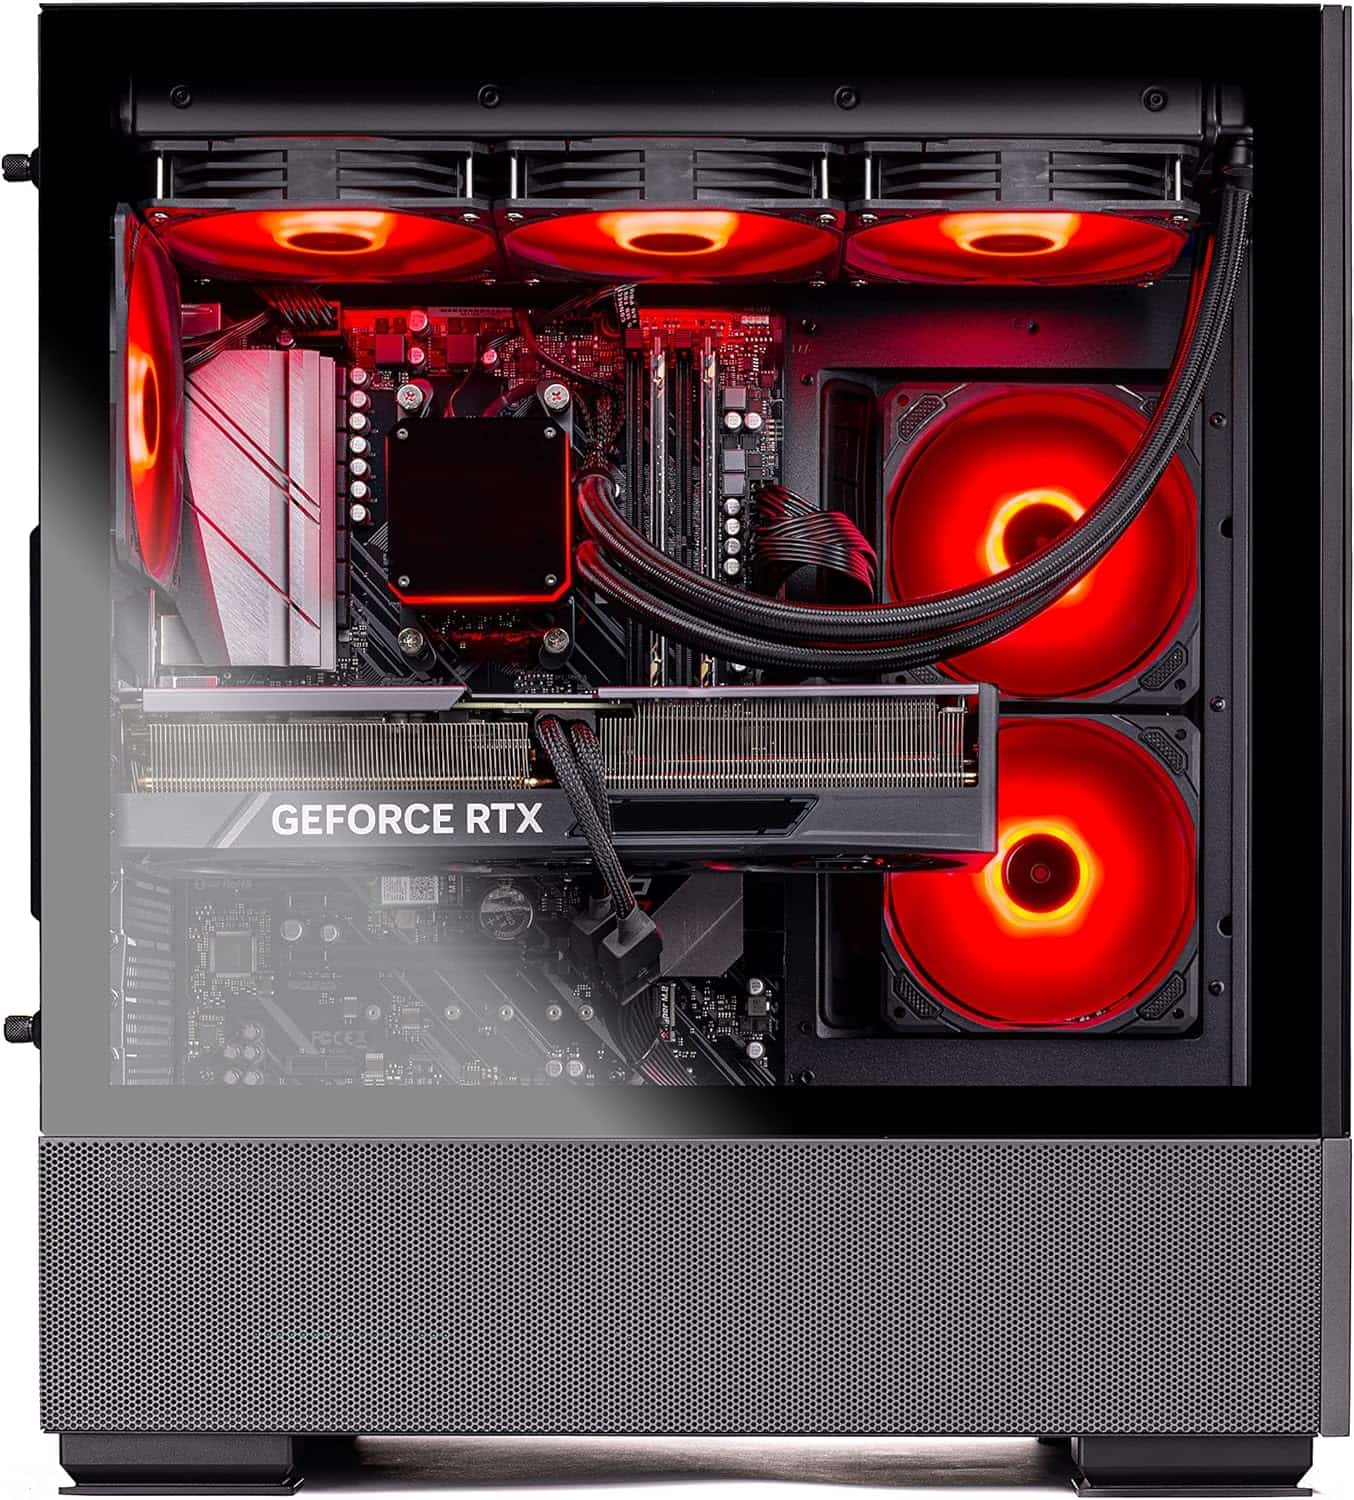 High-performance Skytech Gaming Azure desktop with red led fans and a GeForce RTX graphics card.